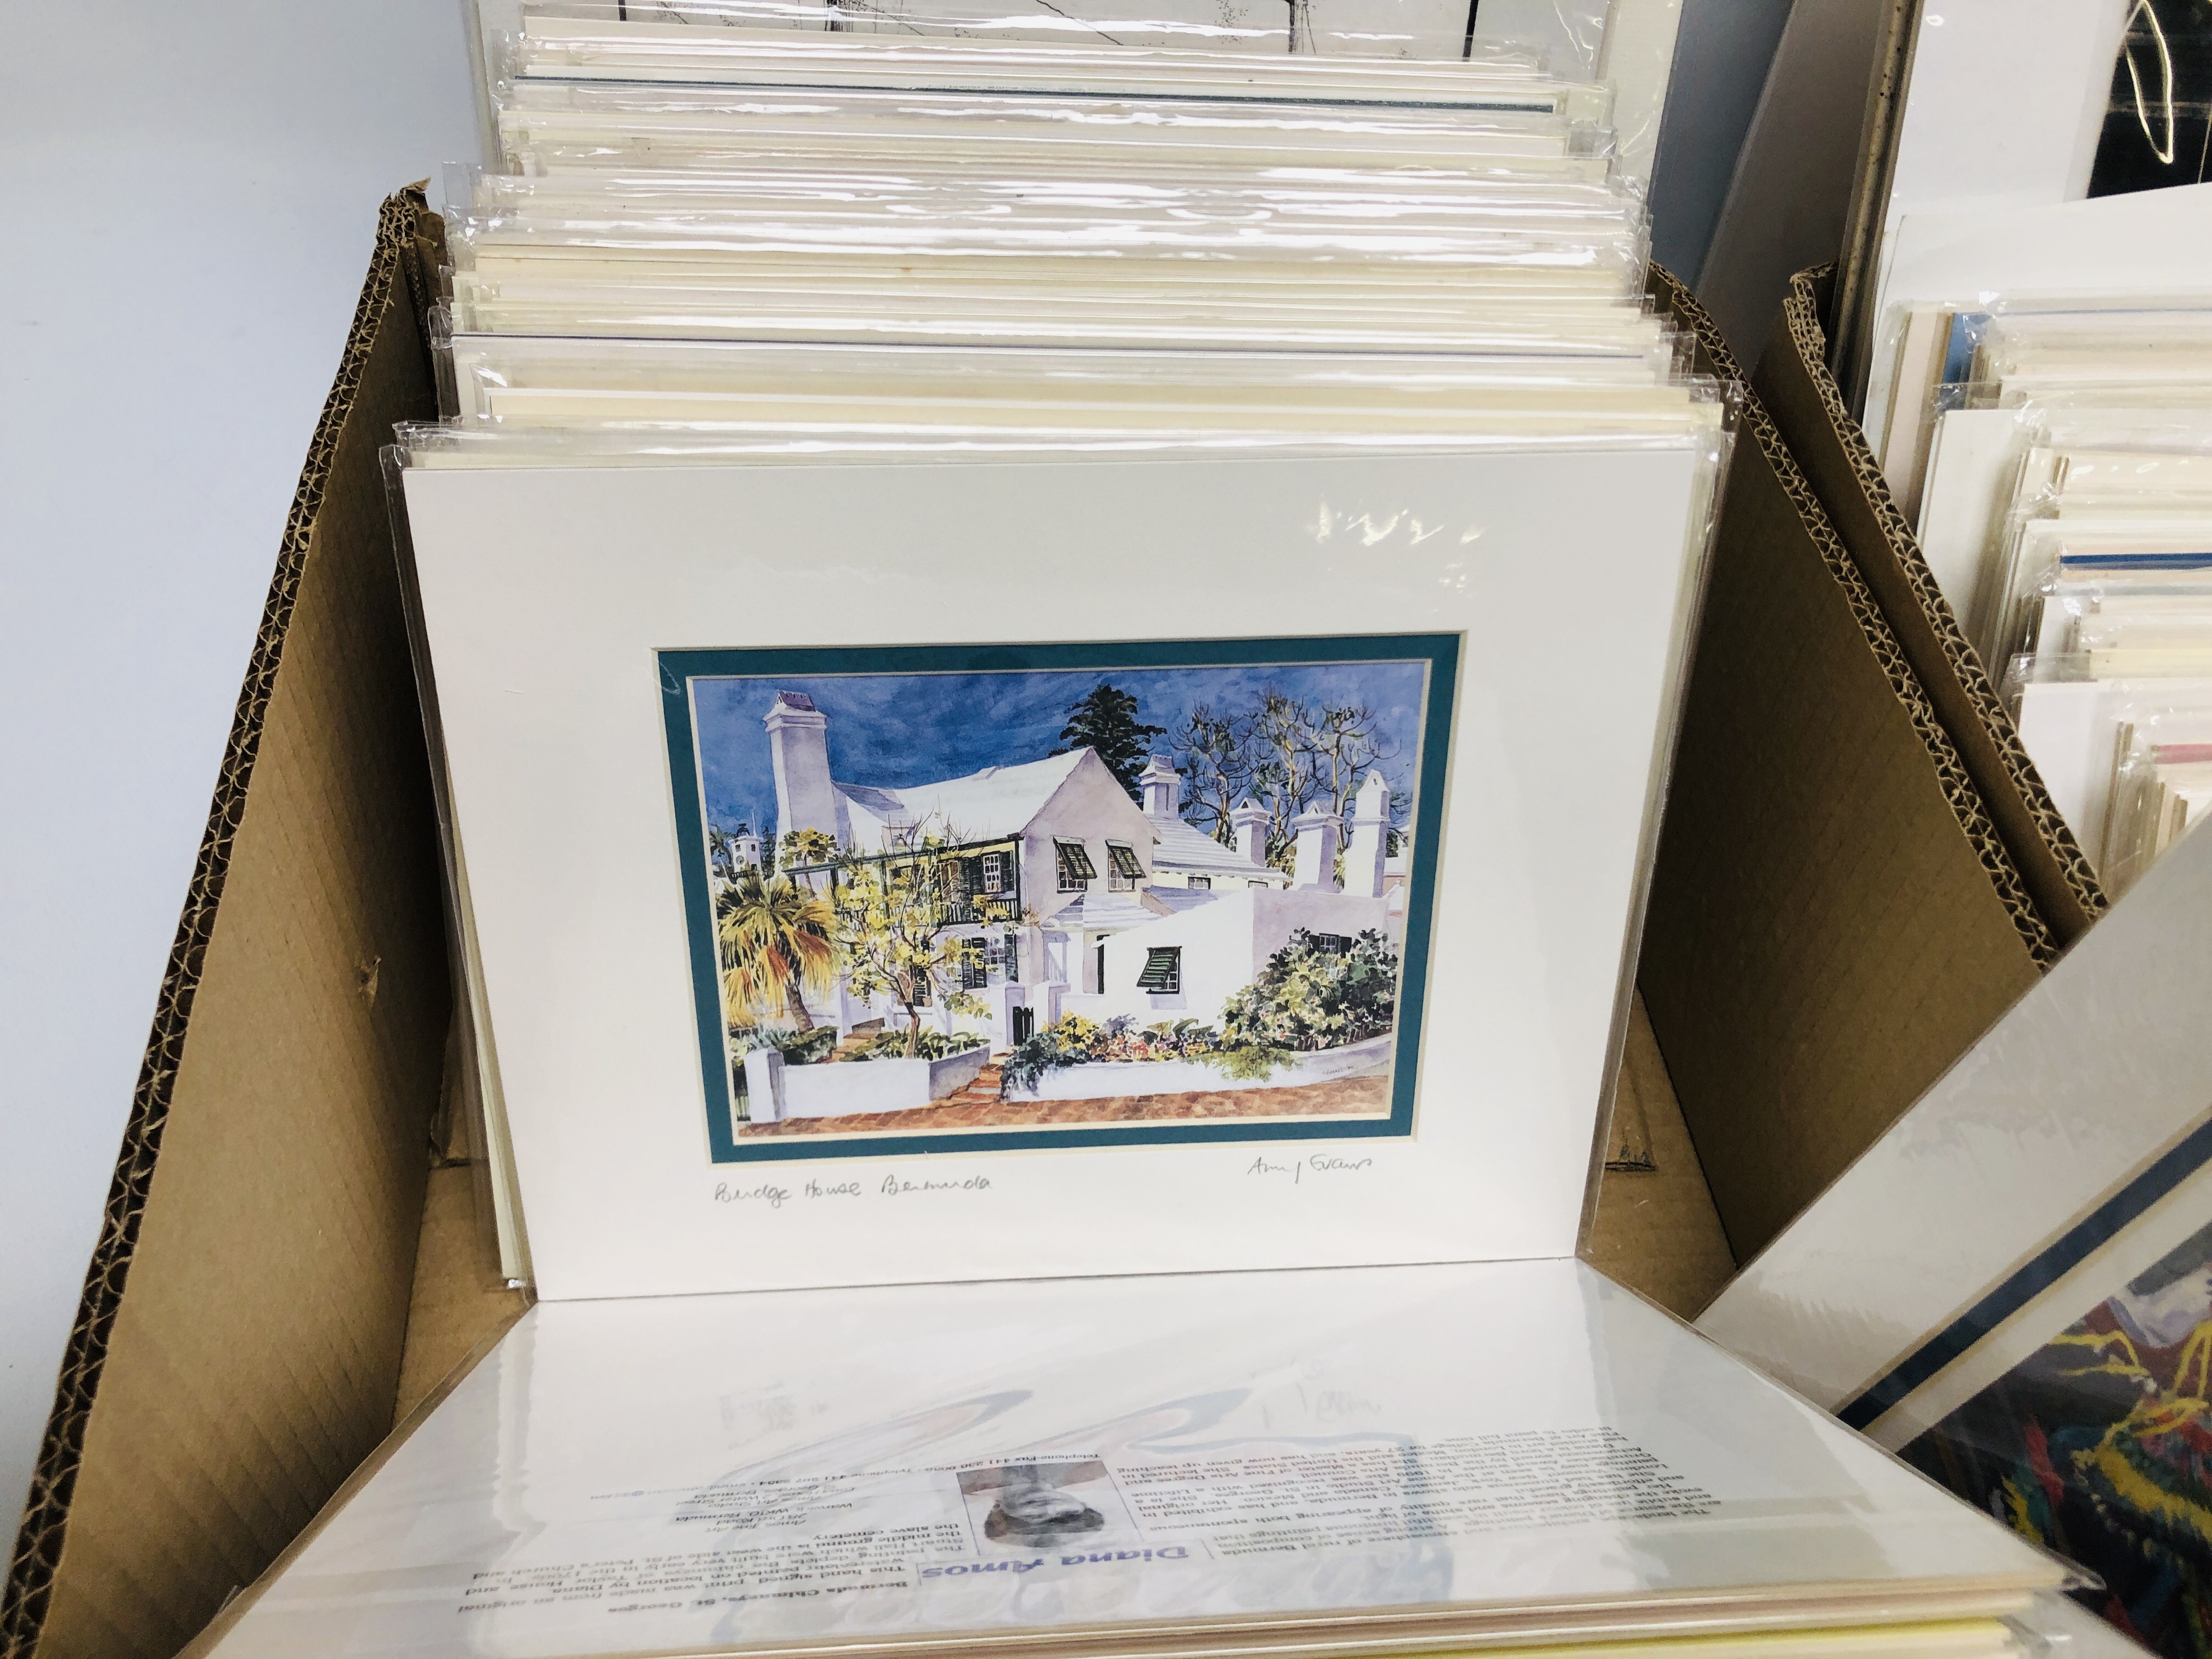 TWO BOXES OF MOUNTED PRINTS DEPICTING MAINLY SCENES OF BERMUDA BEARING PENCIL SIGNATURE DIANA - Image 6 of 11